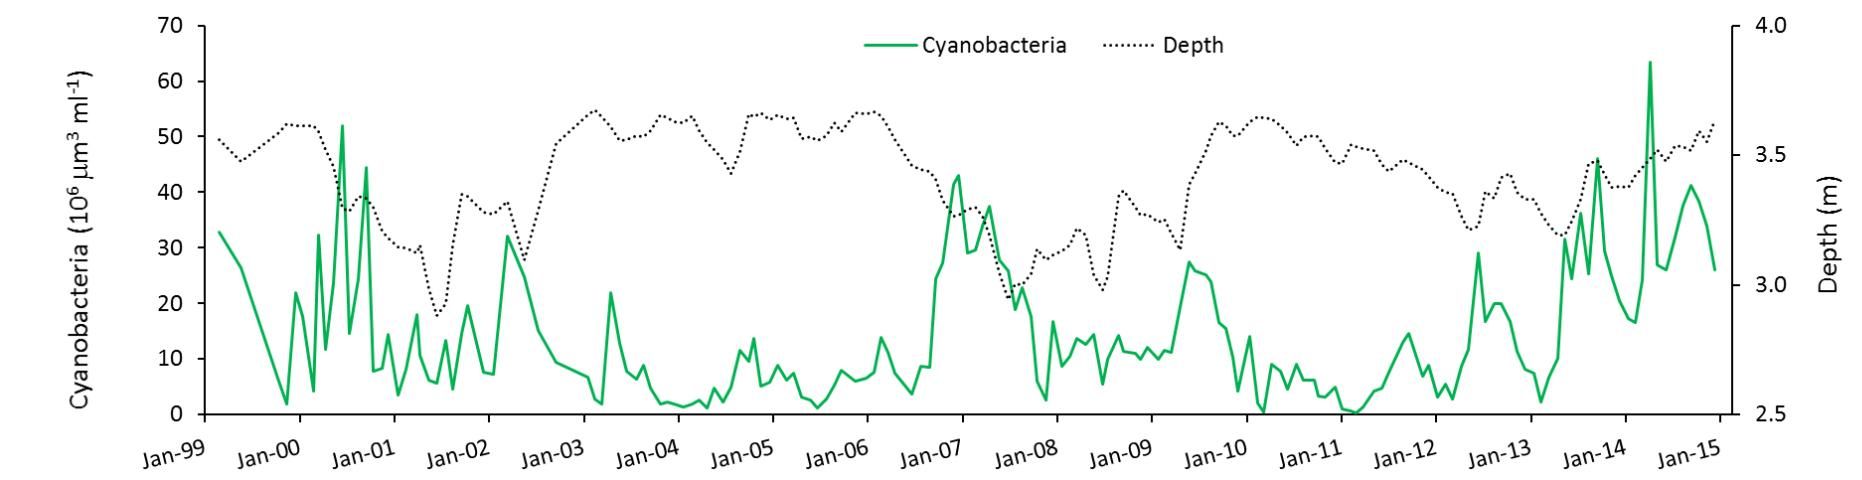 Figure 2. The biomass of cyanobacteria over a period of 15 years in Lake Harris, based on monthly sampling, superimposed on a plot of monthly water levels. Cyanobacteria biomass is lower in high-water periods.